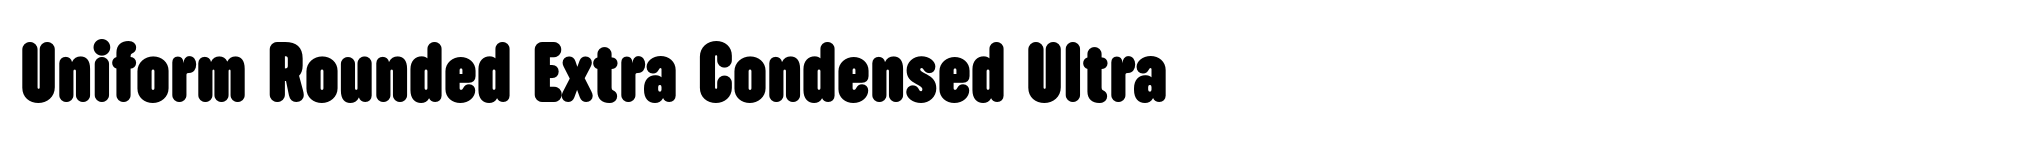 Uniform Rounded Extra Condensed Ultra image